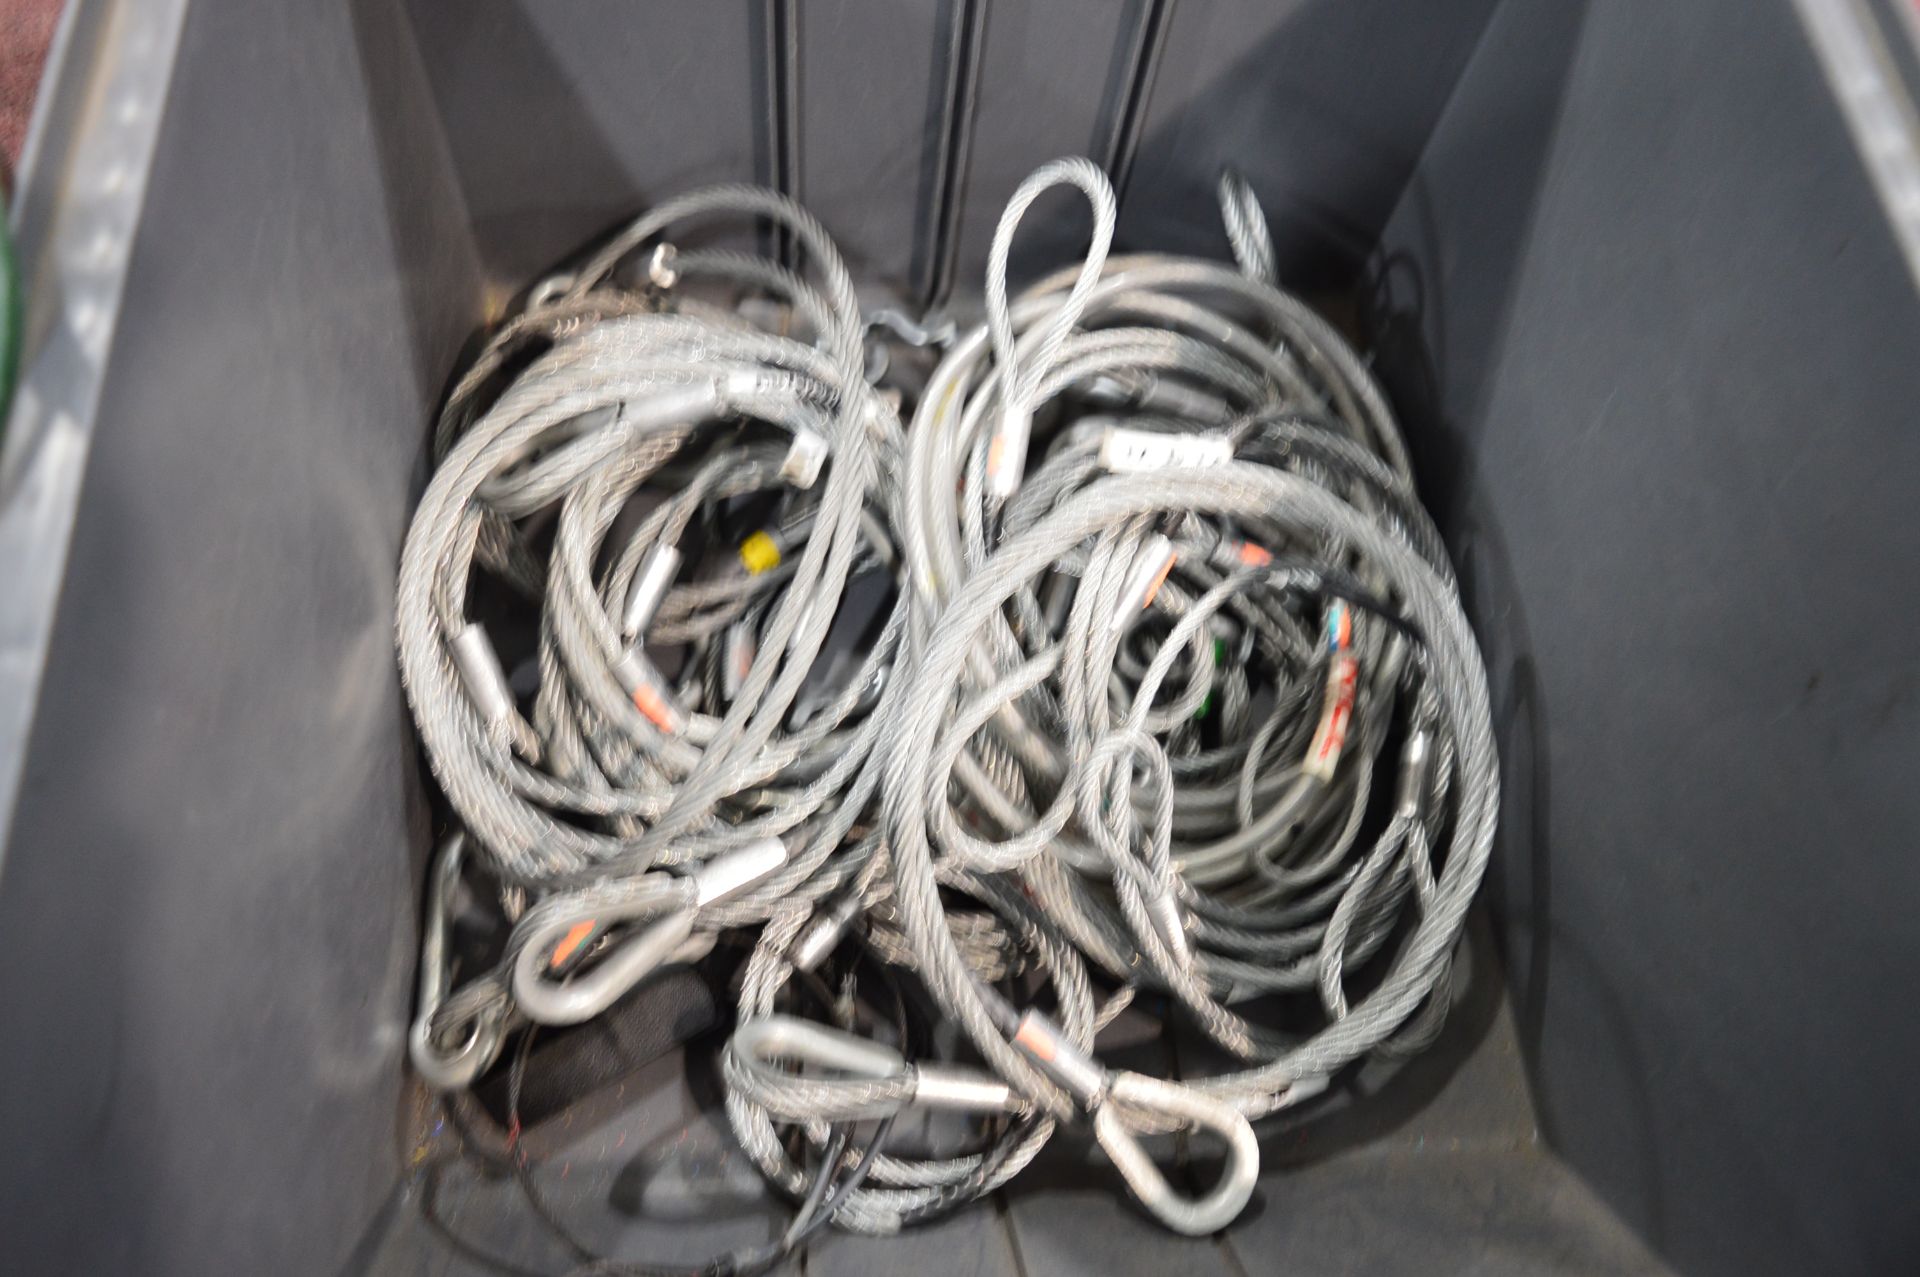 Quantity of various hanging steels and carabiner clips: Unit 500, Eckersall Road, Birmingham B38 - Image 3 of 3